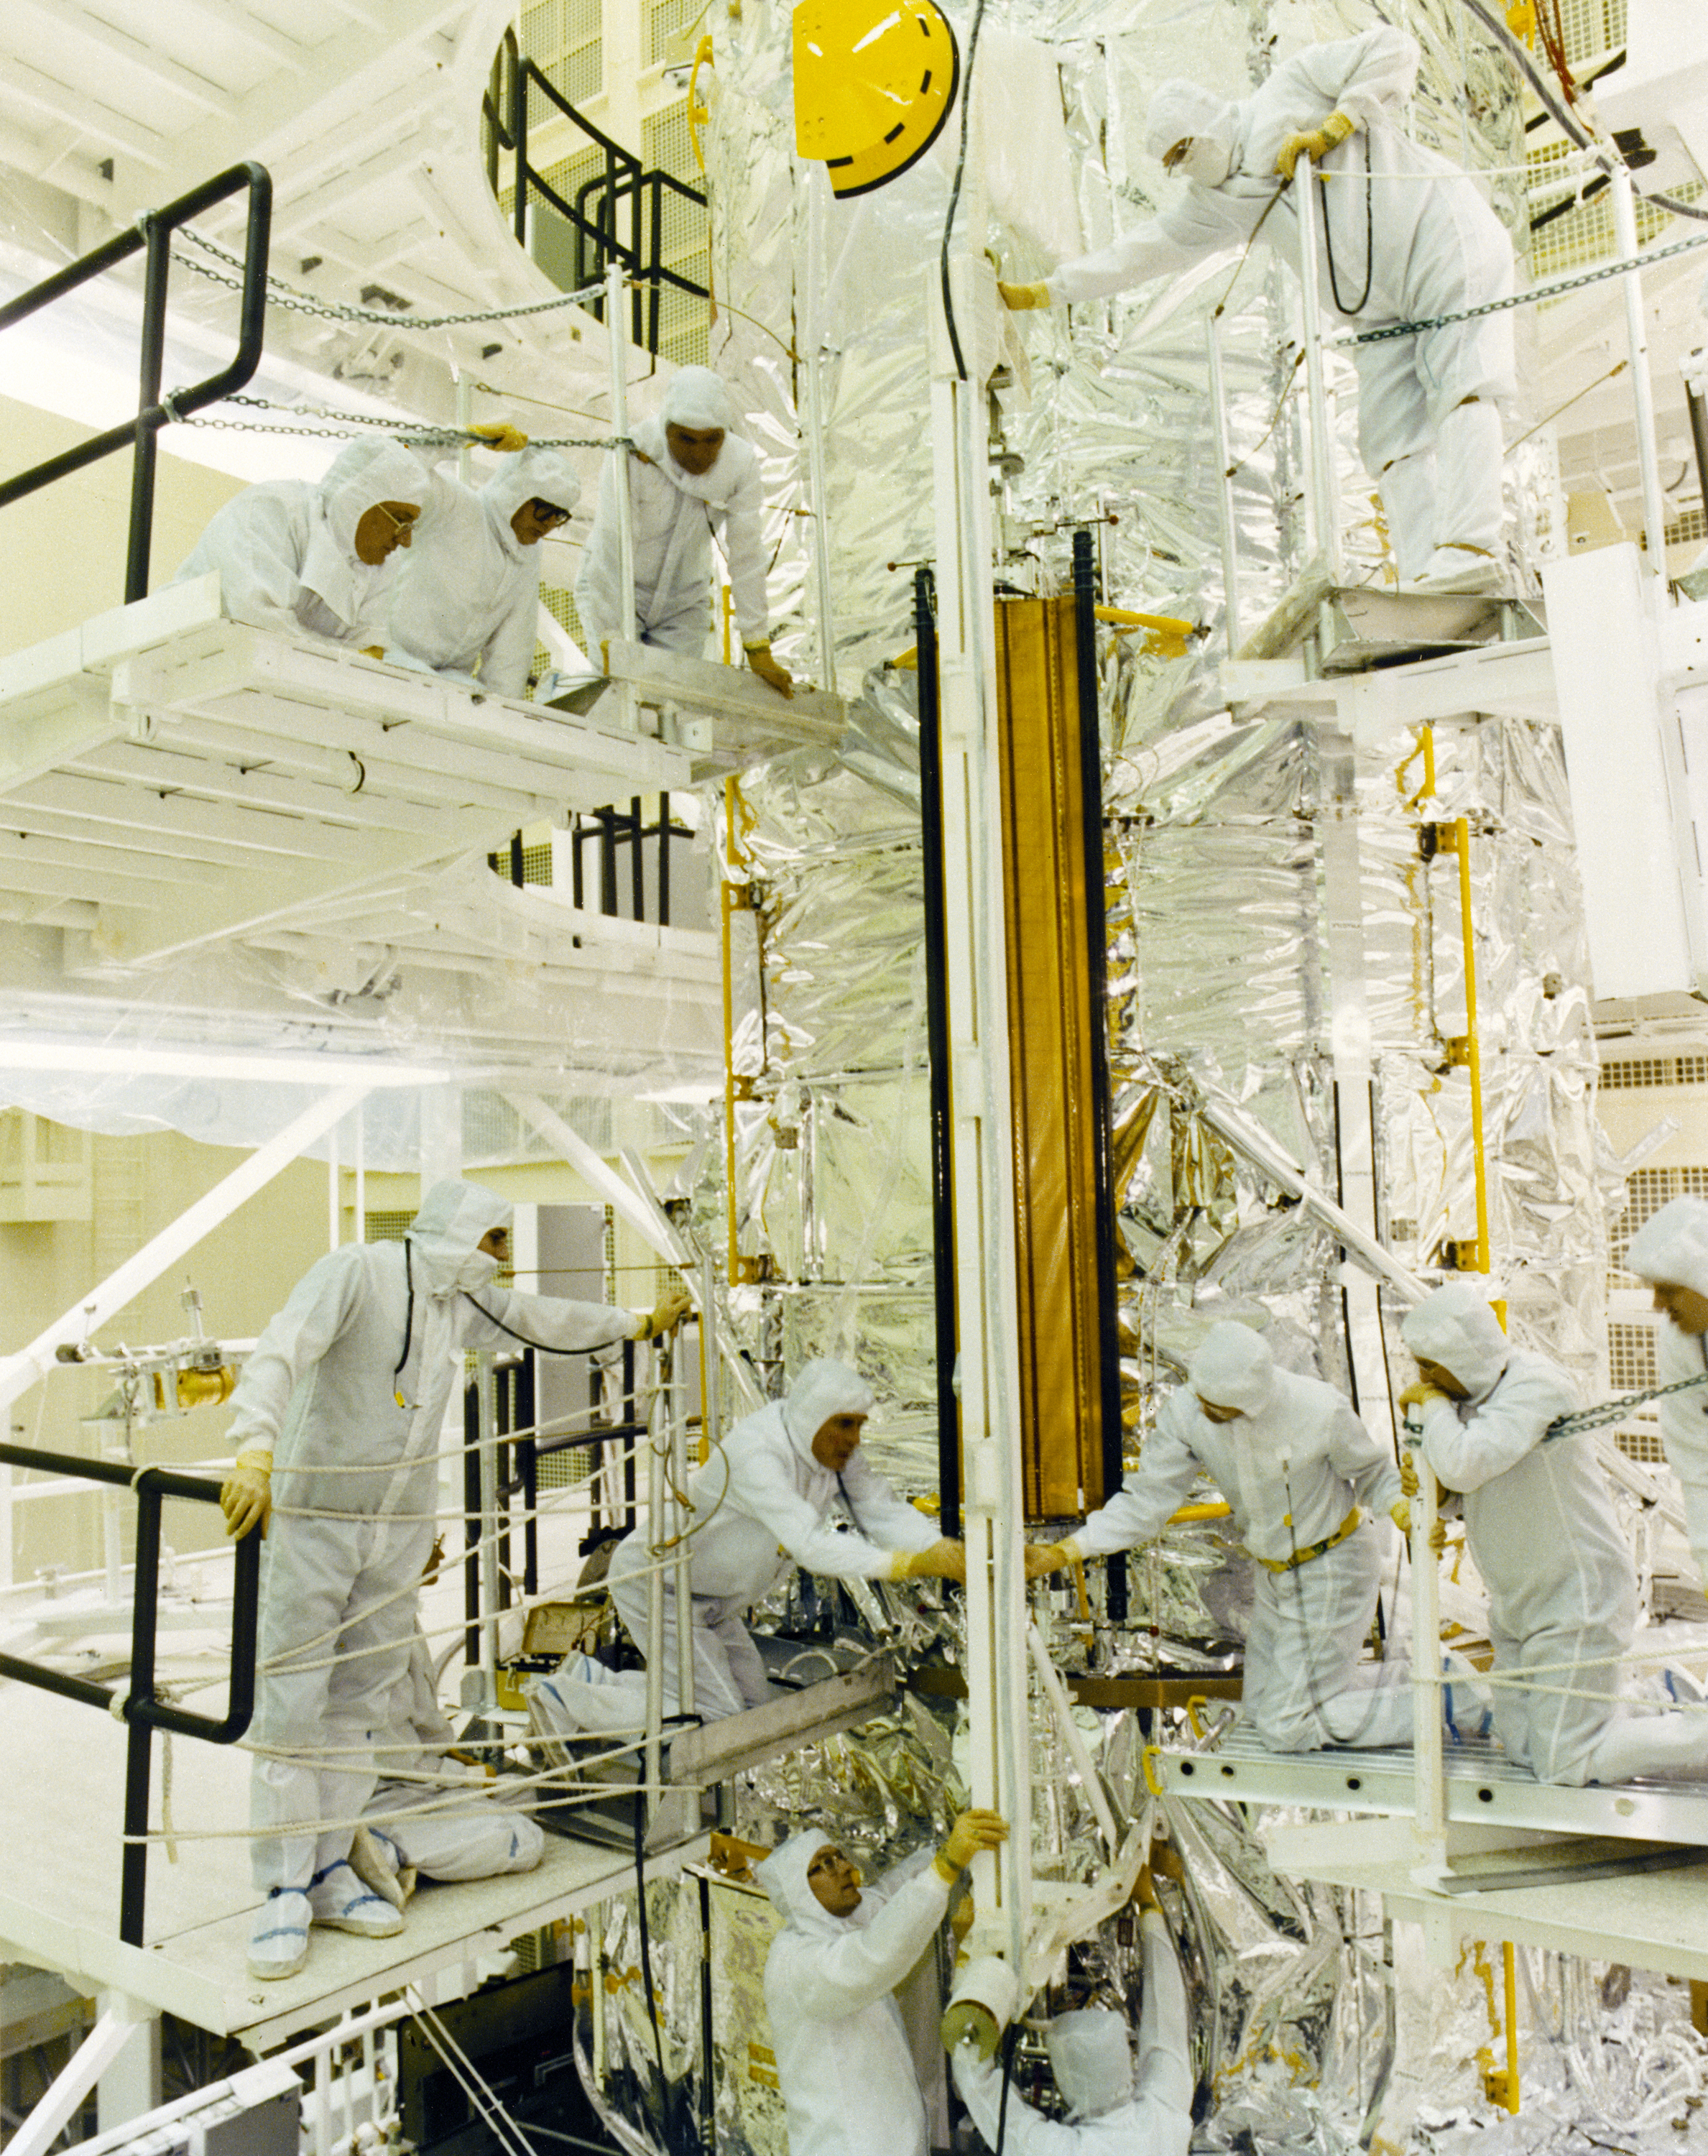 Engineers in cleanroom suits gather around the solar array attached to Hubble at multiple heights.